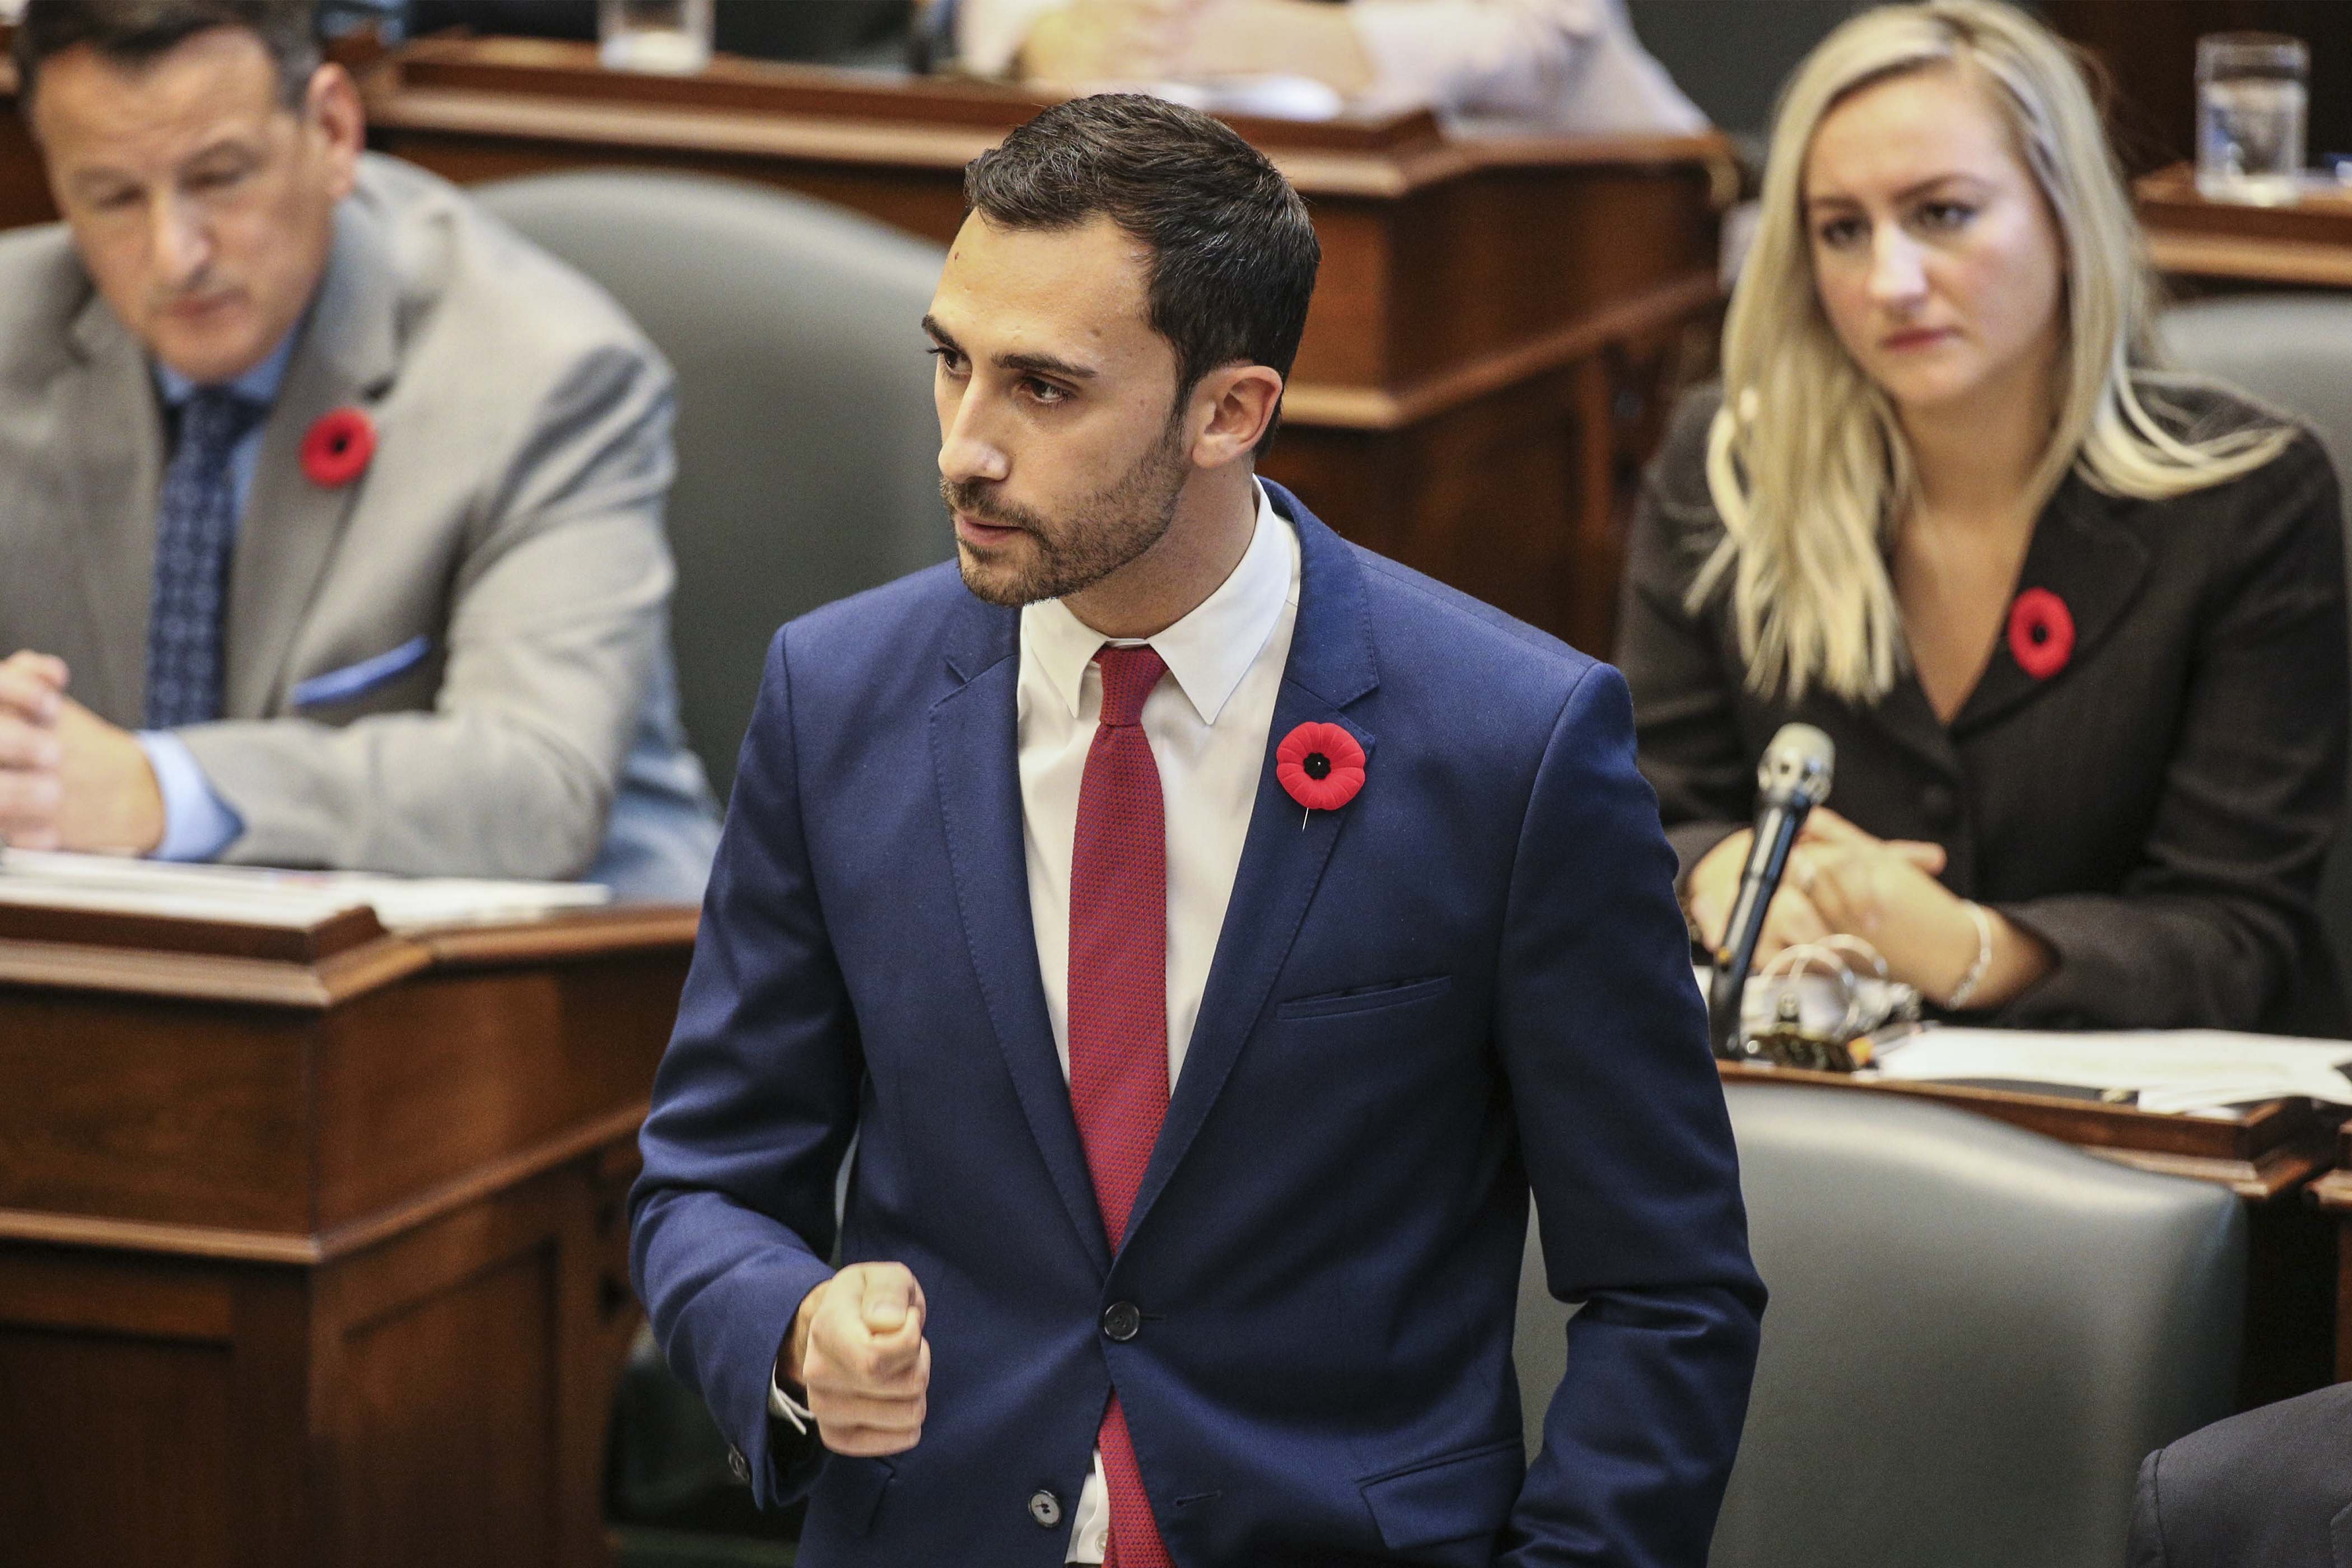 Harris: Minister Lecce's plan to get out of education strife while saving face is yet to come